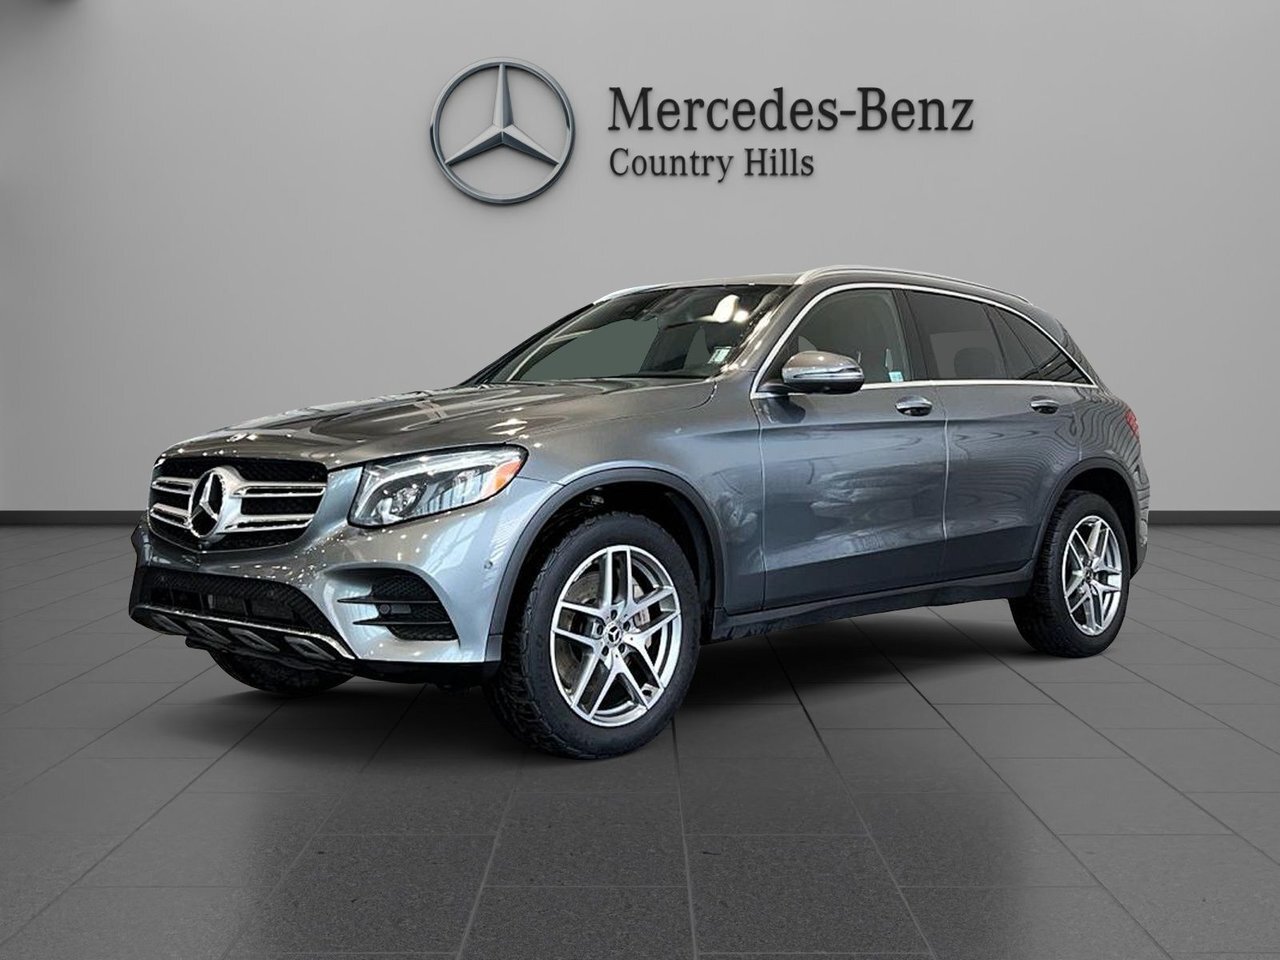 2018 Mercedes-Benz GLC300 4MATIC SUV Extended warranty! No accidents!